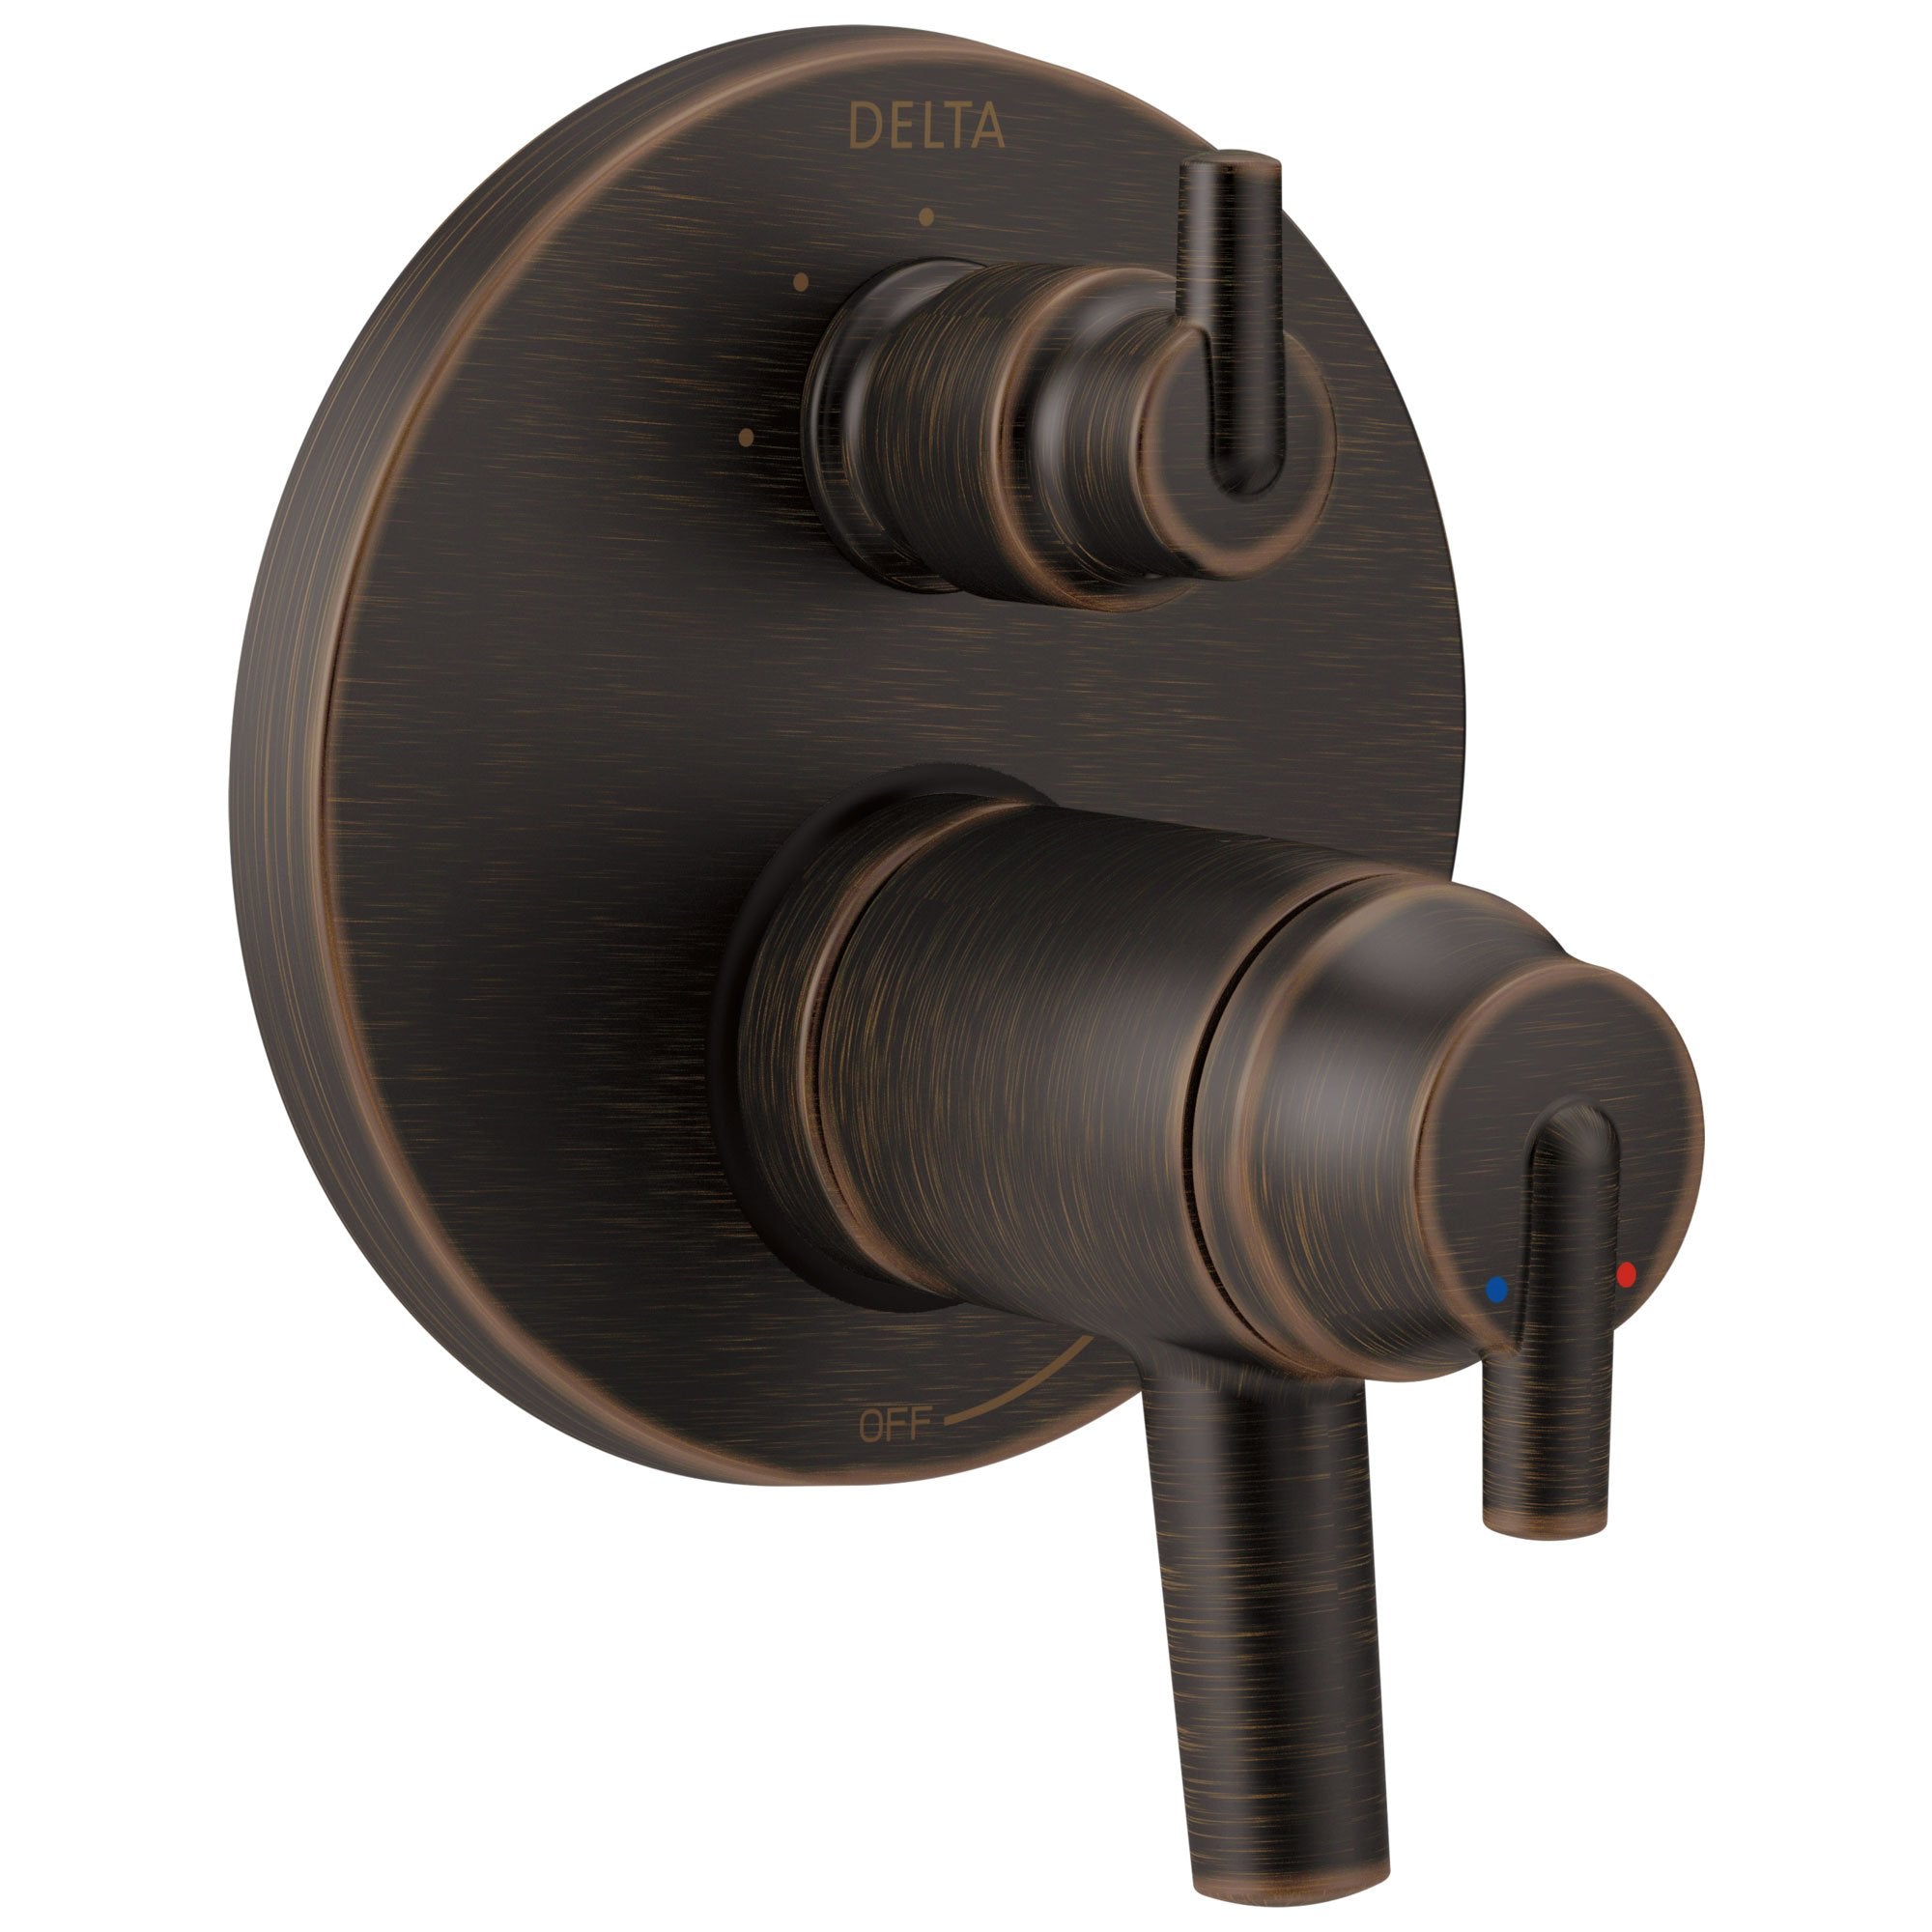 Delta Trinsic Venetian Bronze Thermostatic Shower Faucet Control Handle with 3-Setting Integrated Diverter Includes Trim Kit and Valve with Stops D2139V